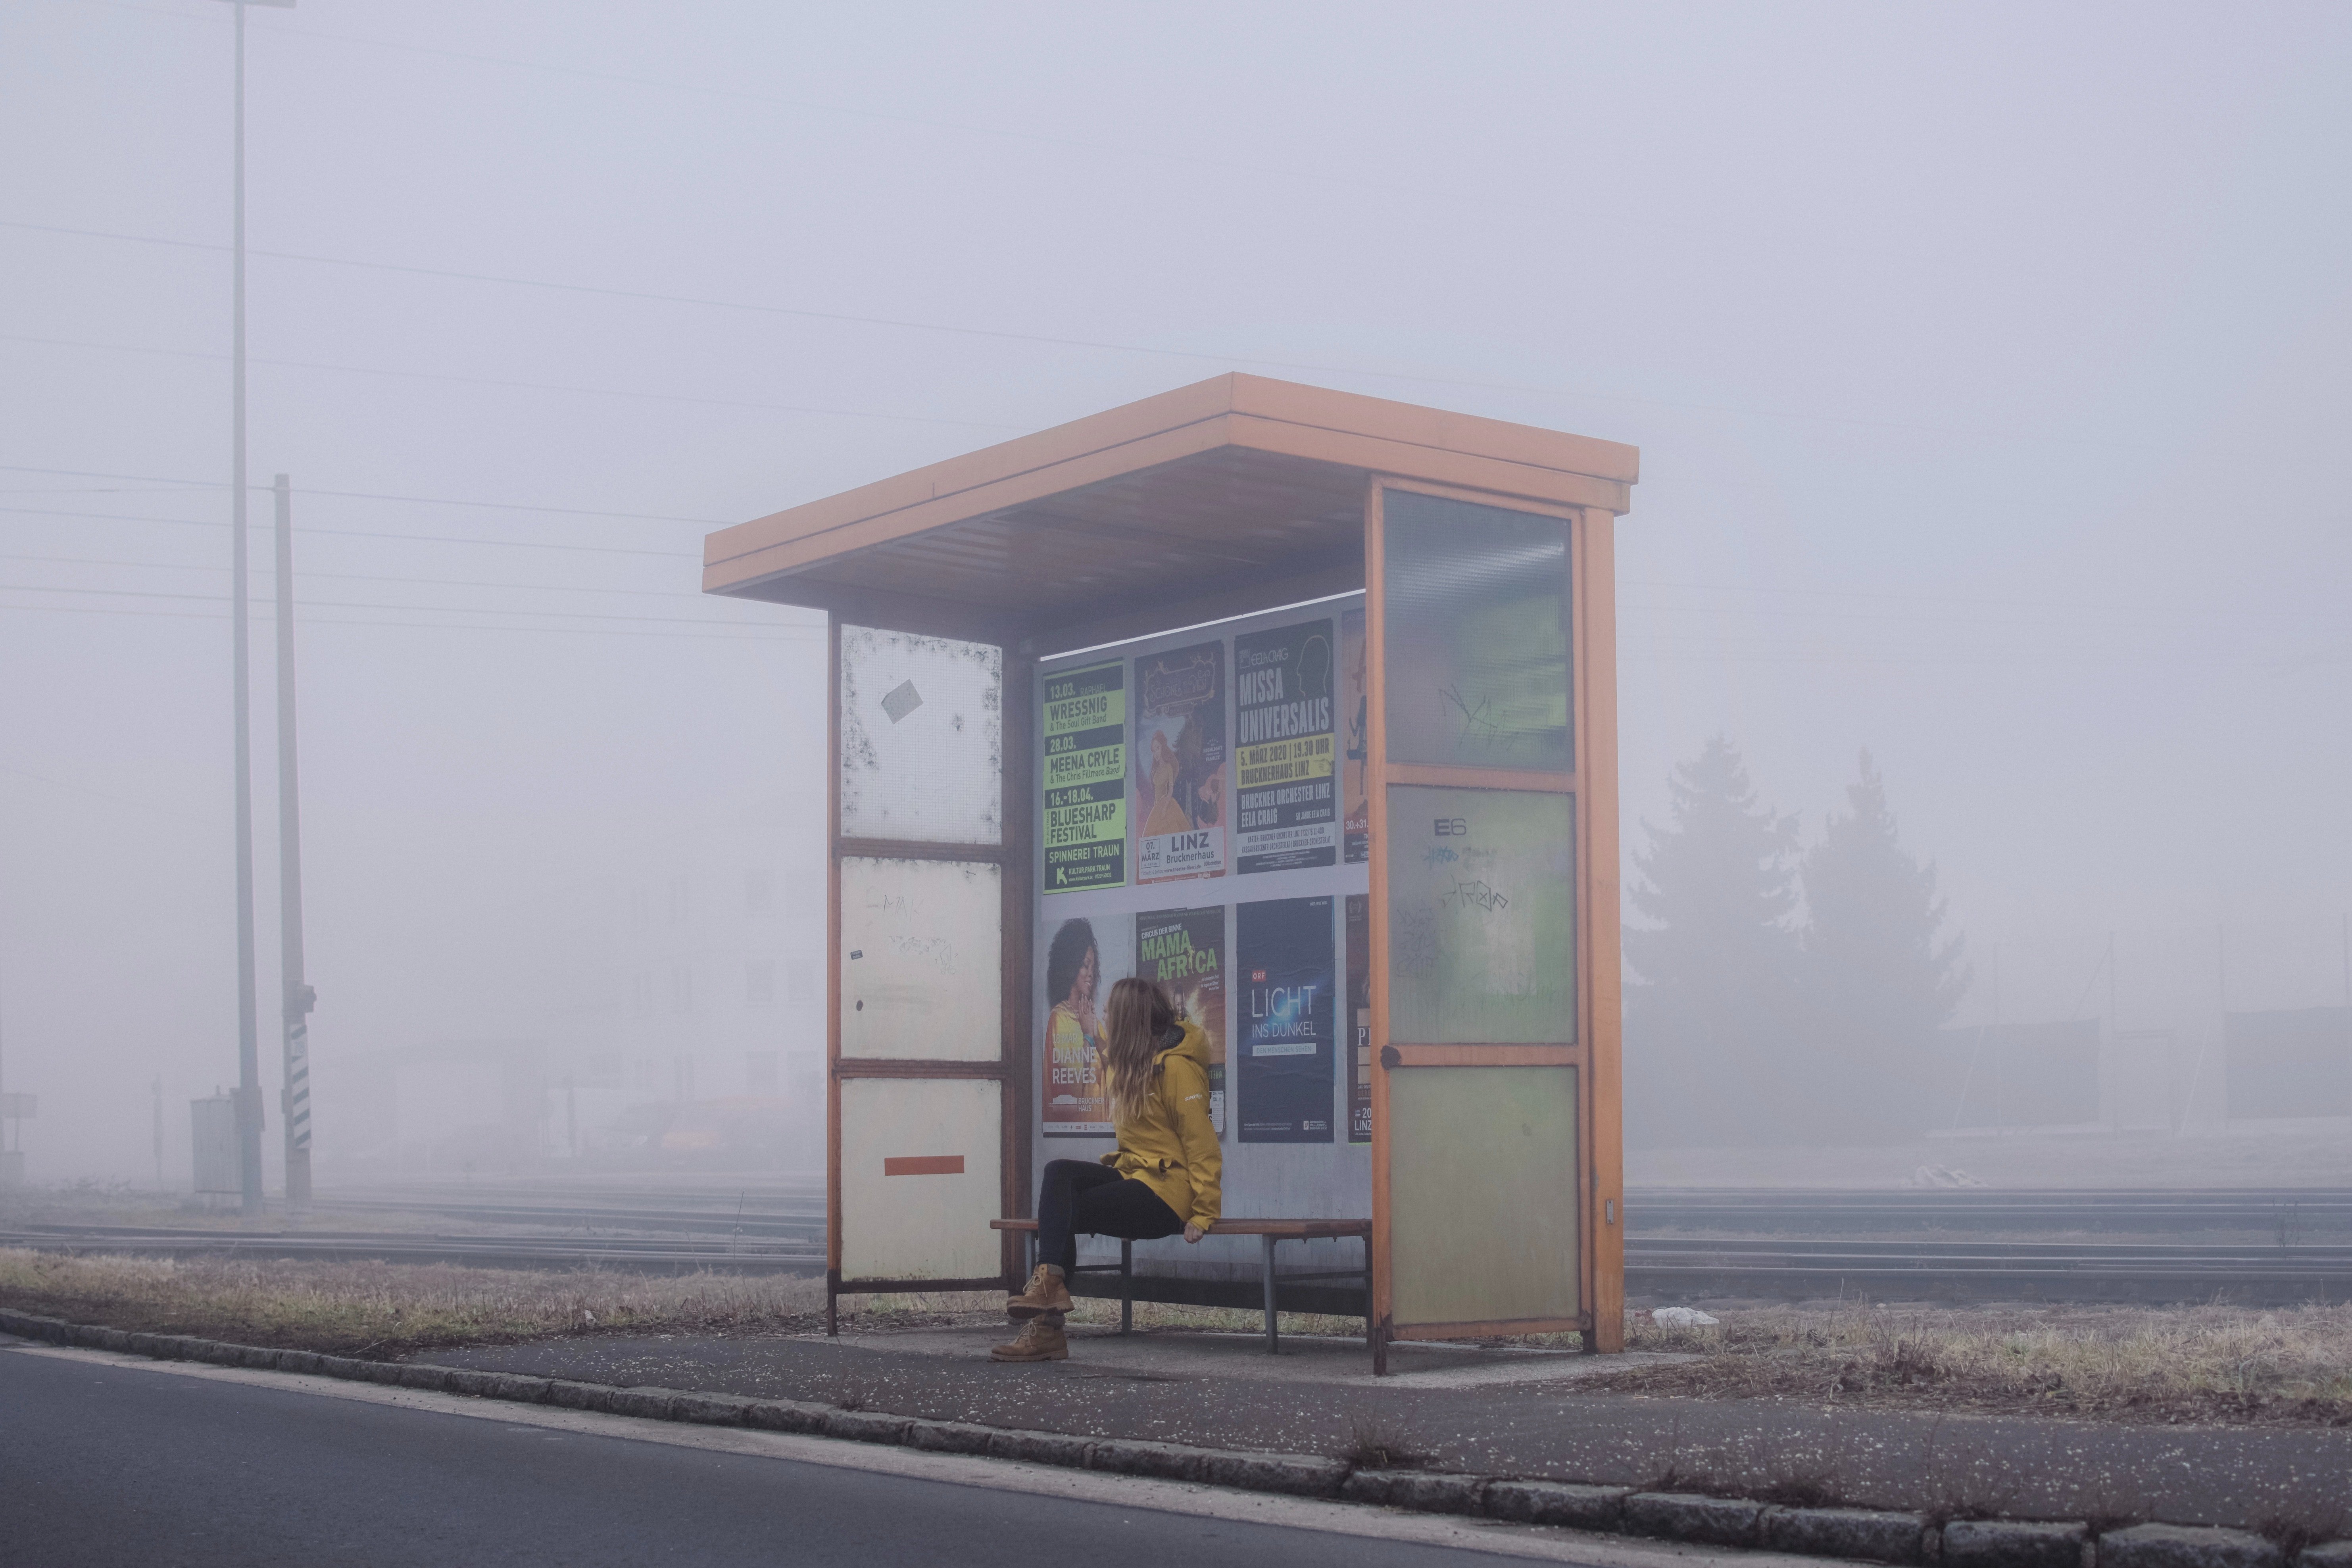 Lara was stuck for at least another hour waiting for the bus. | Source: Unsplash